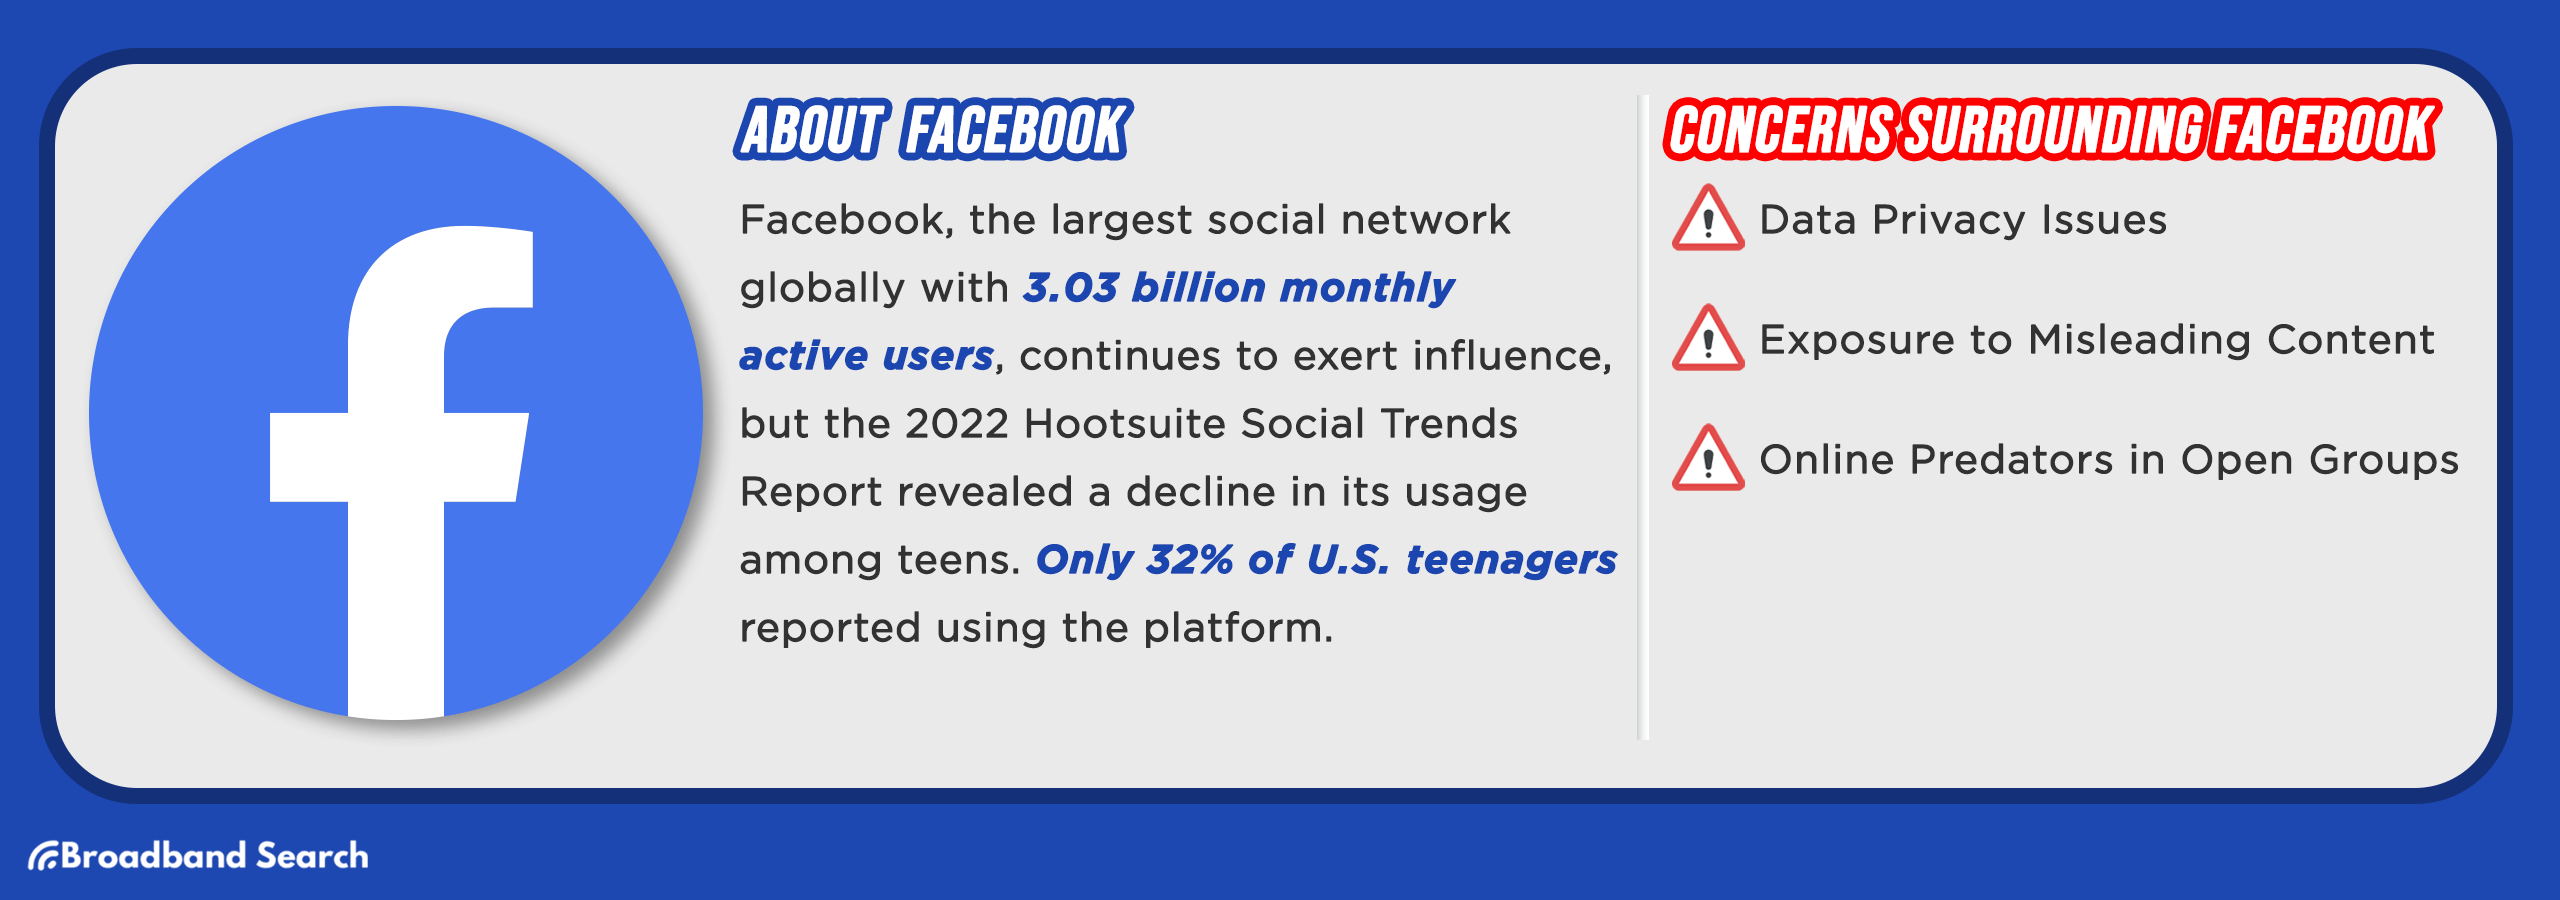 Statistics on Facebook and concerns surrounding usage of the social media app